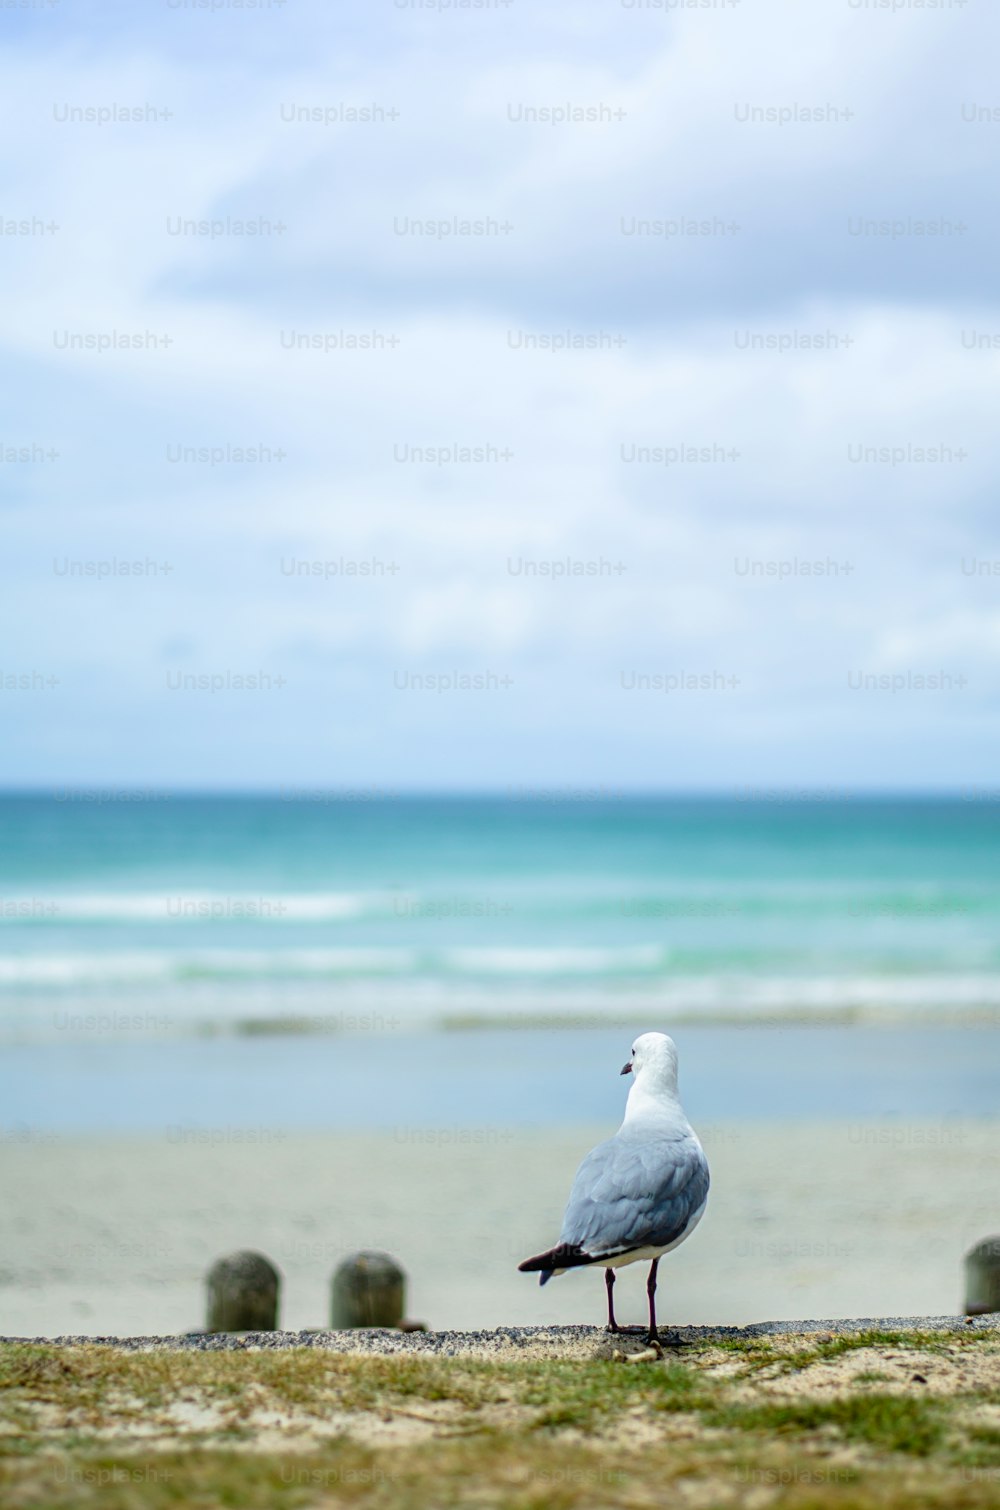 a seagull is standing on the sand near the ocean